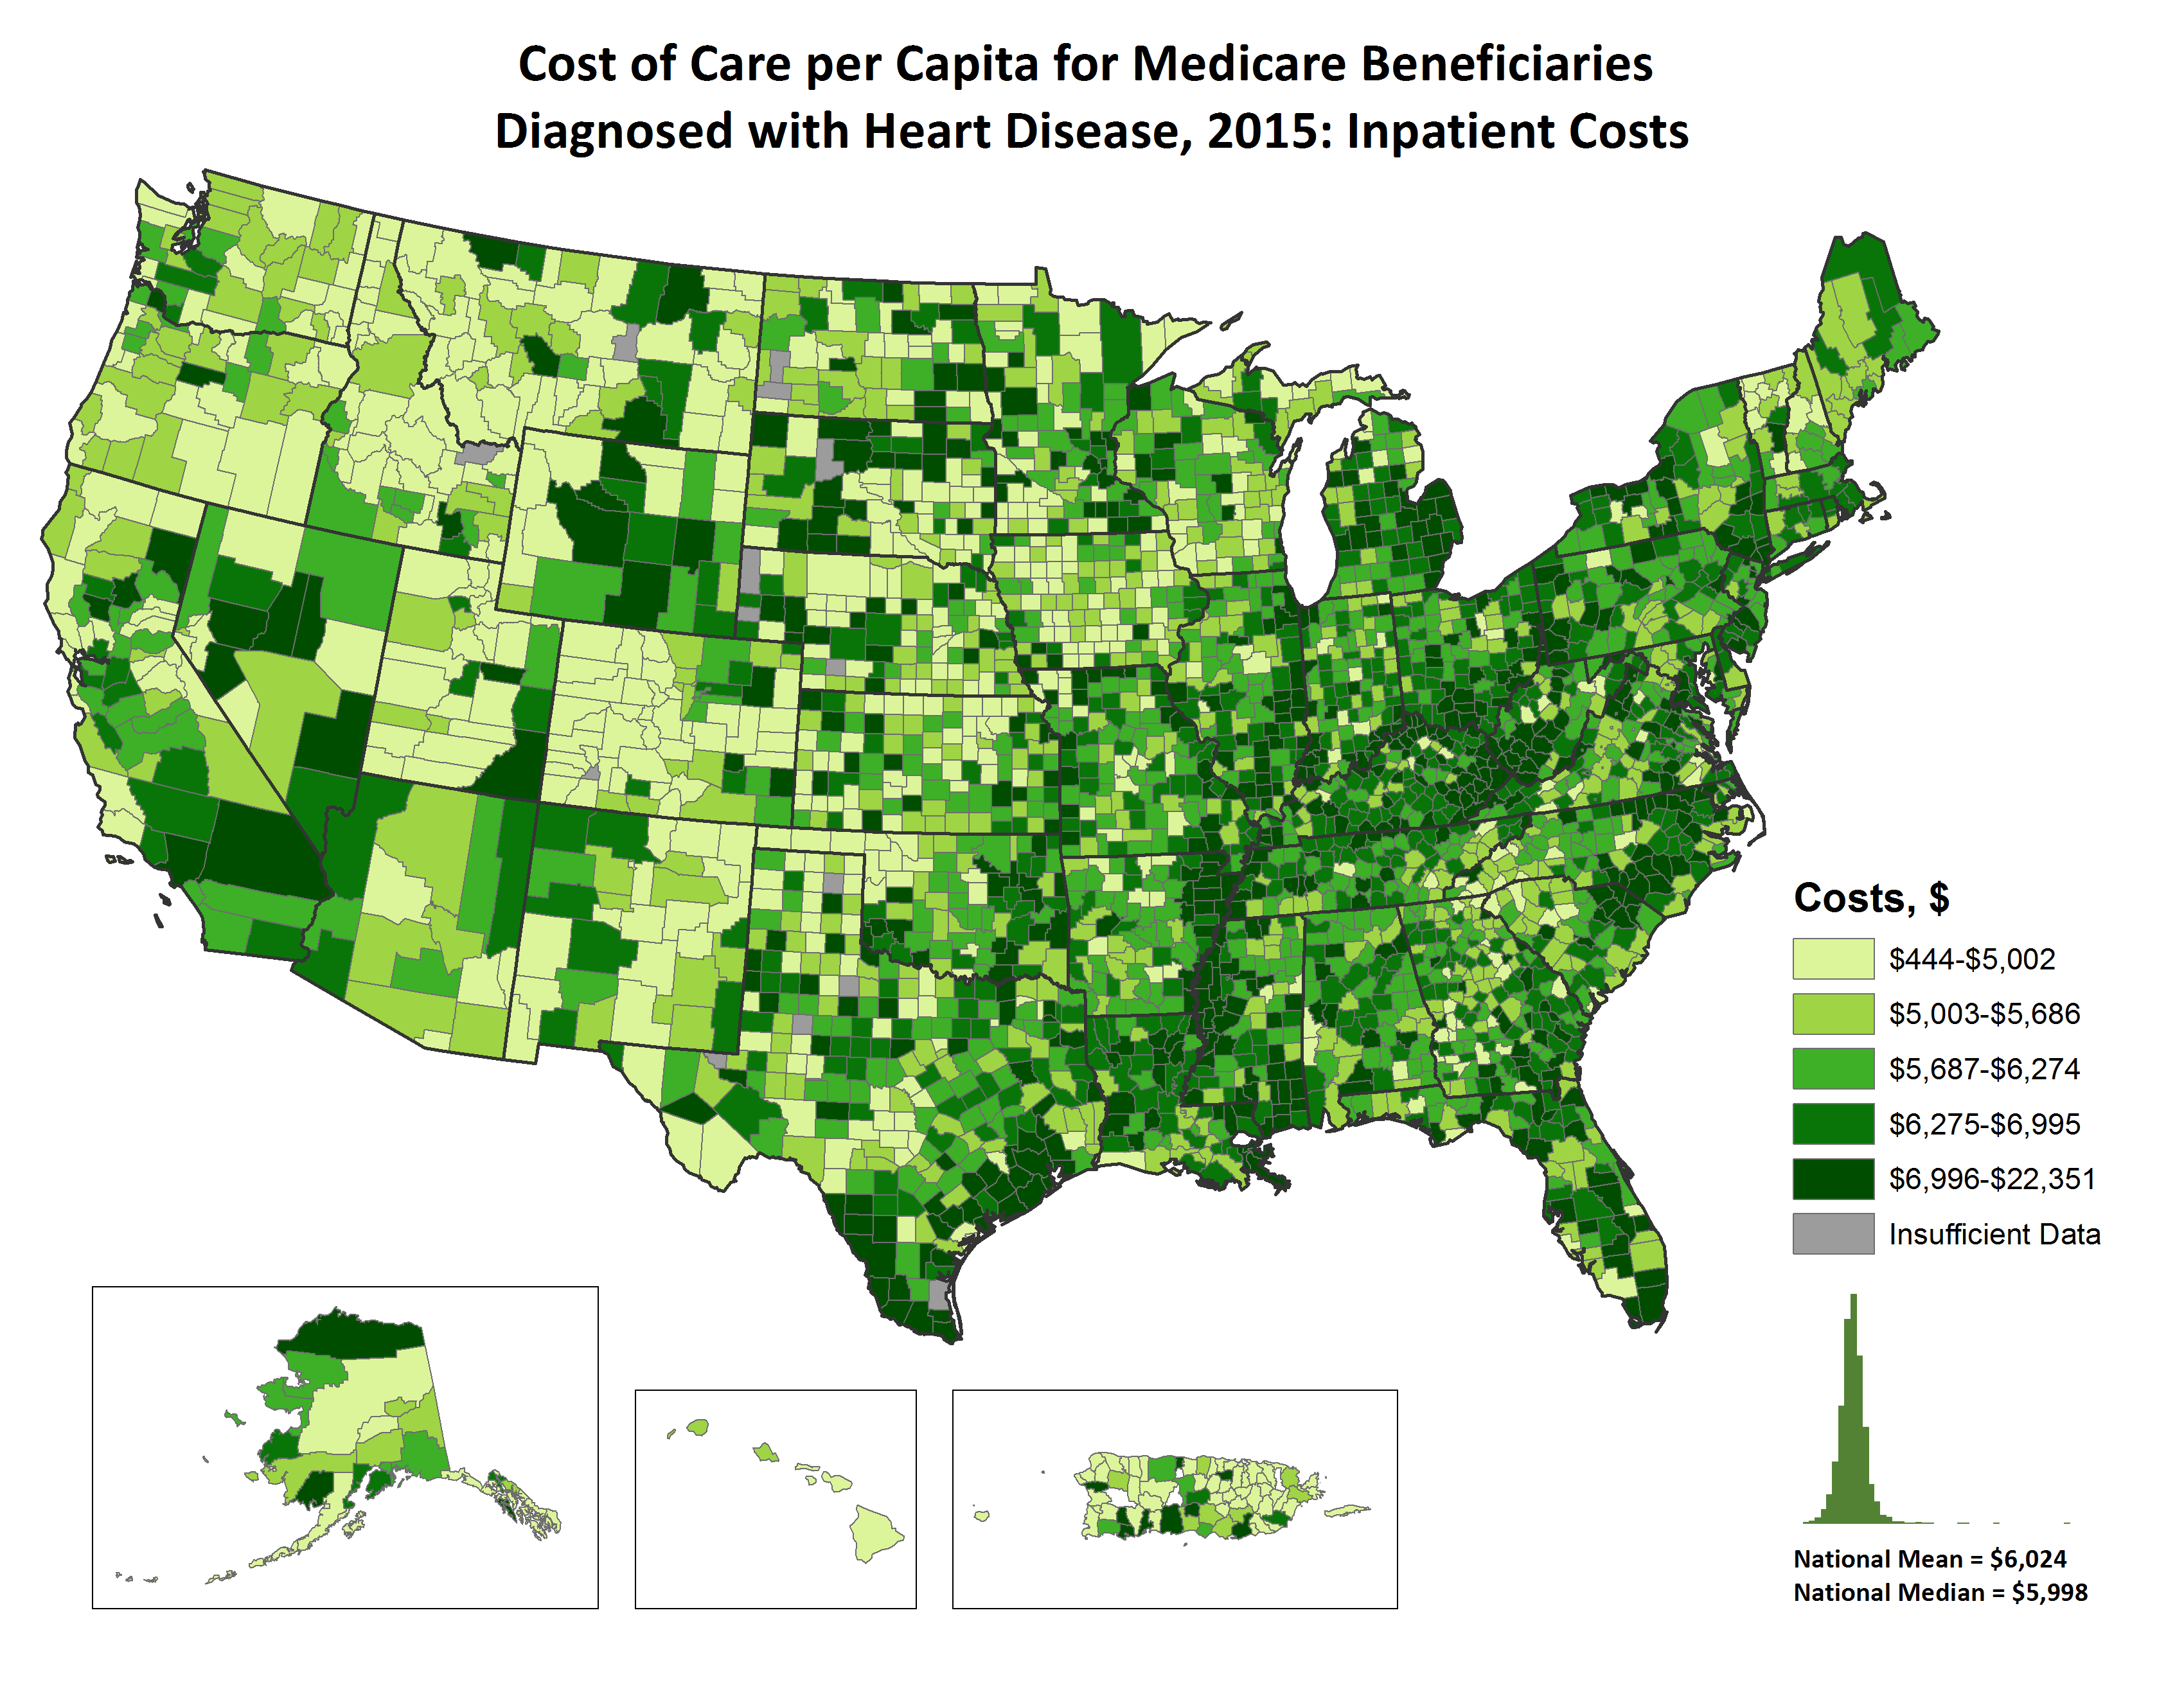 Costs of Care per Capita for FFS Medicare beneficiaries diagnosed with Heart Disease, 2015: Inpatient Costs, by county. This map shows the concentrations of counties with the highest inpatient costs per capita – meaning the top quintile – are located primarily in pockets of south Texas, North Carolina, Kentucky, Michigan, central California, Nevada, Arkansas, Missouri, Ohio, Florida, Pennsylvania, and New York. 